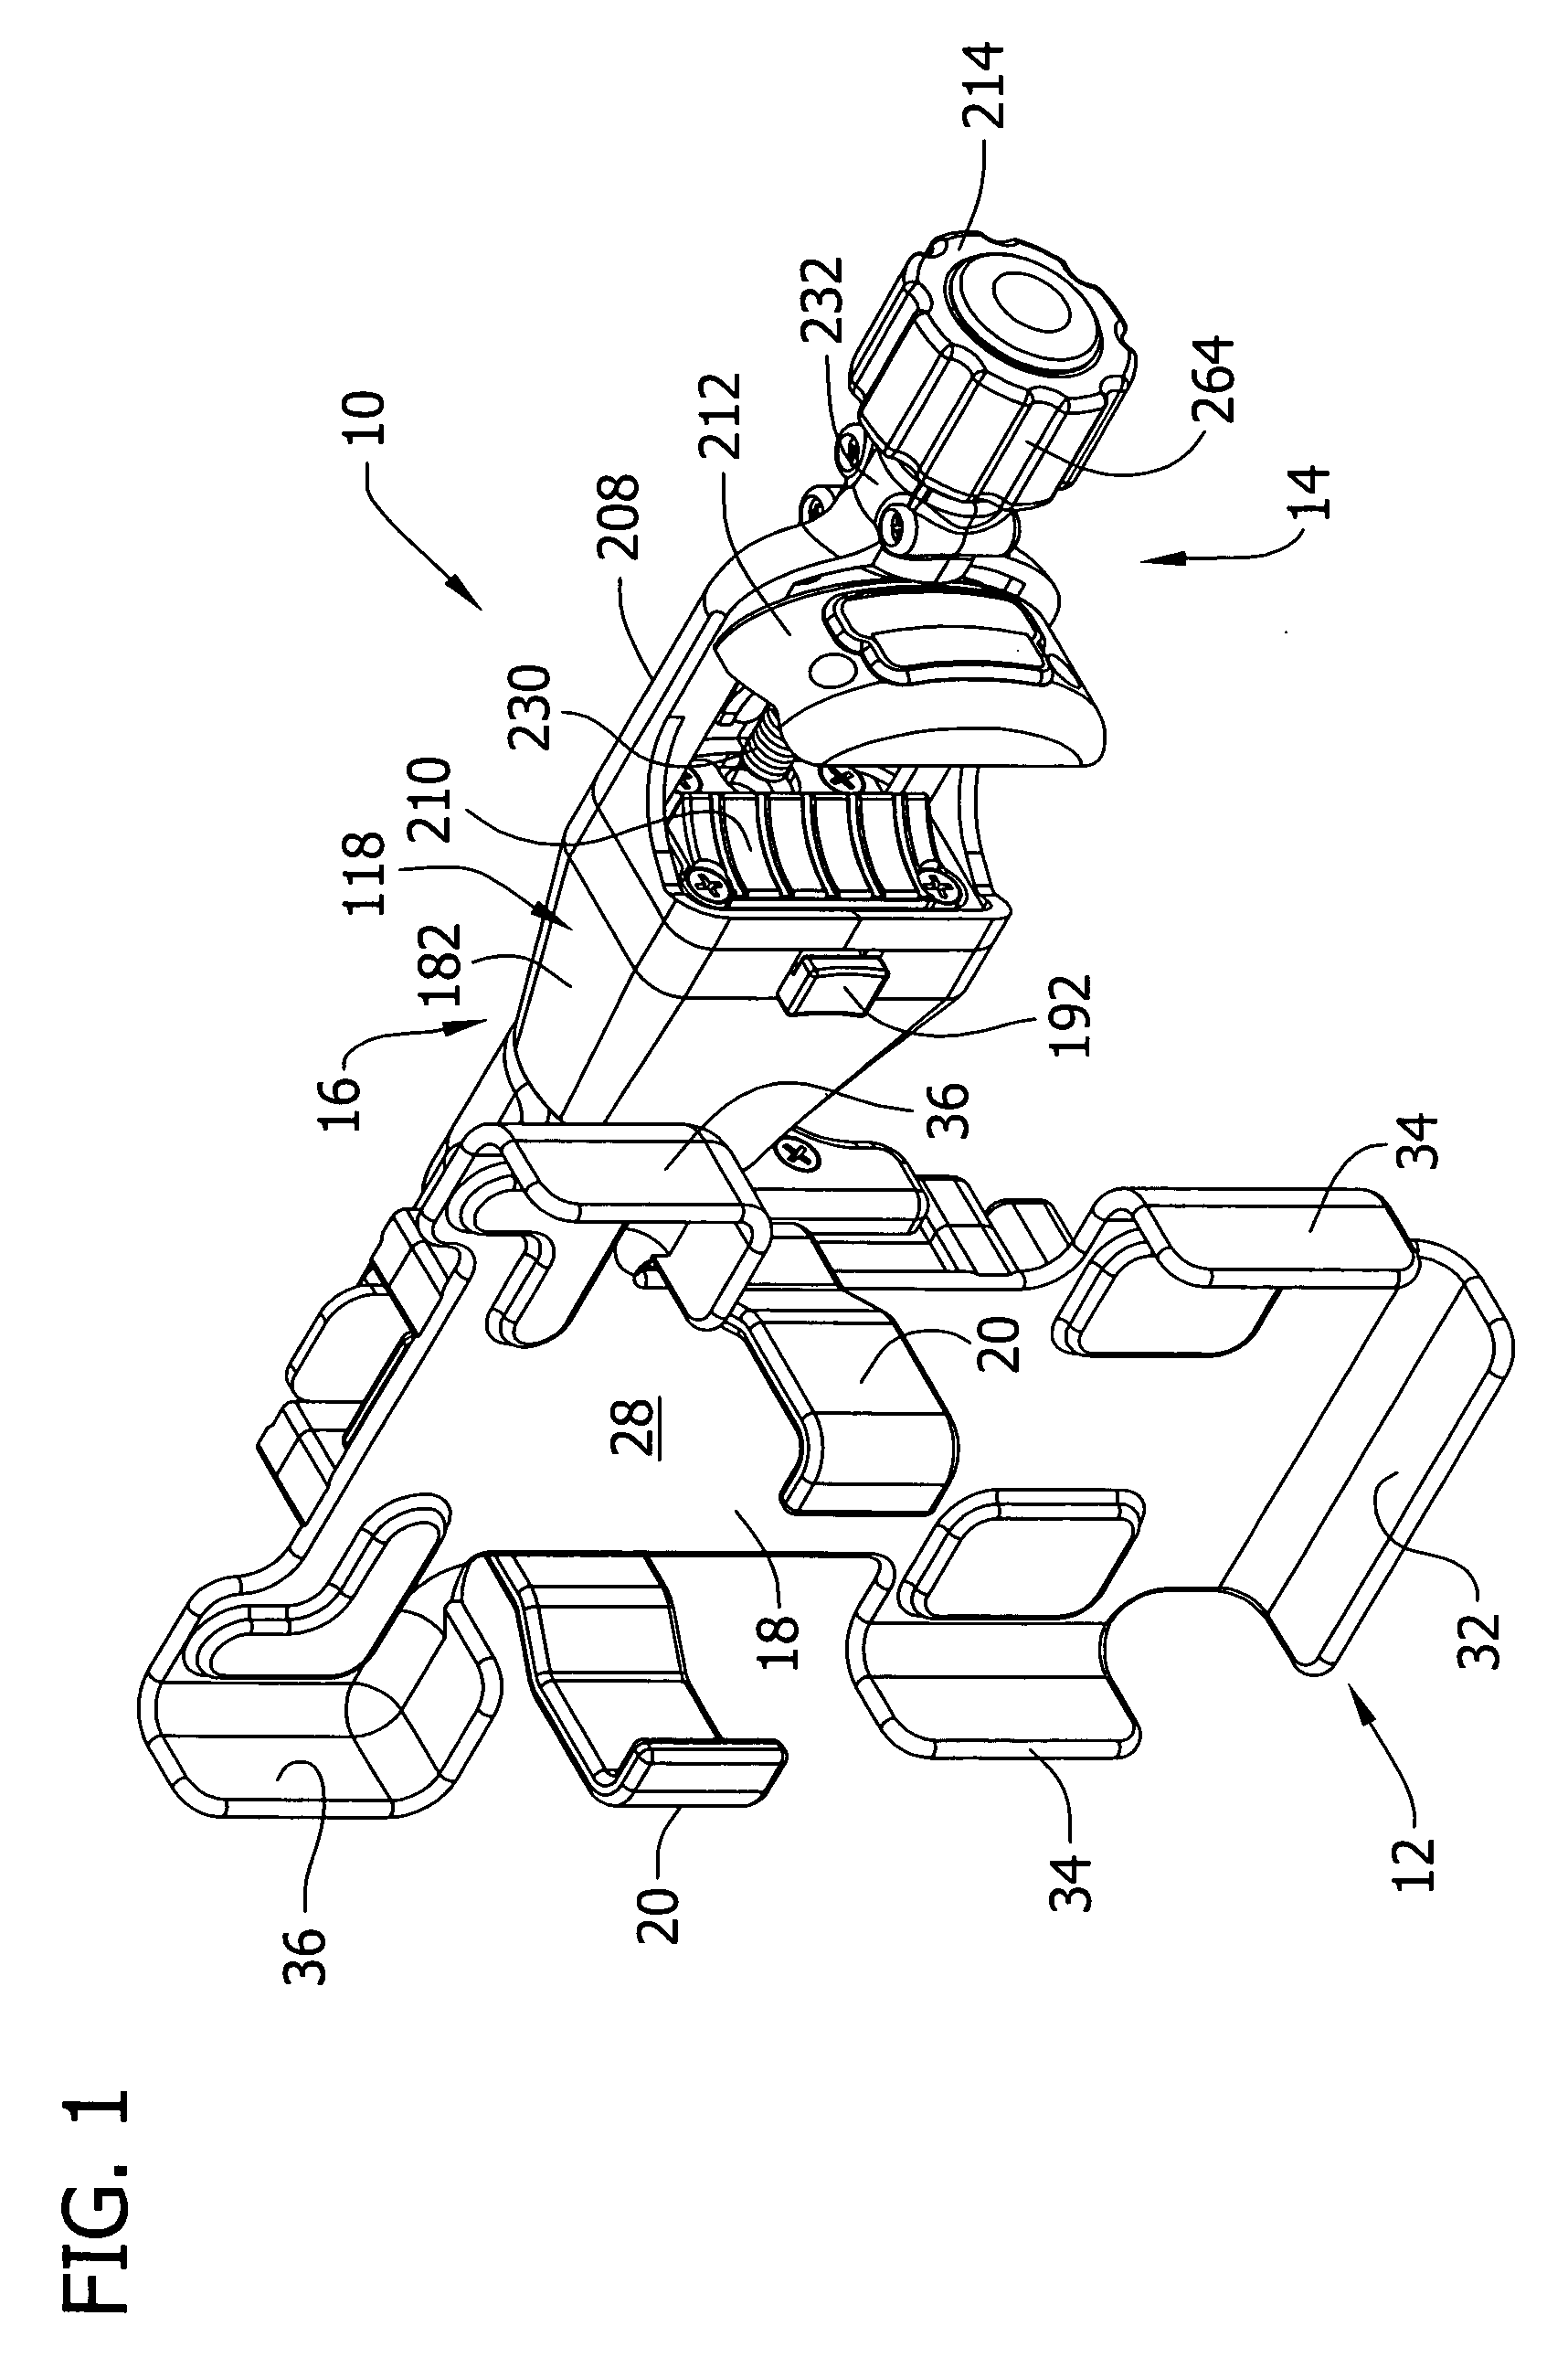 Mount system for handheld electrical device